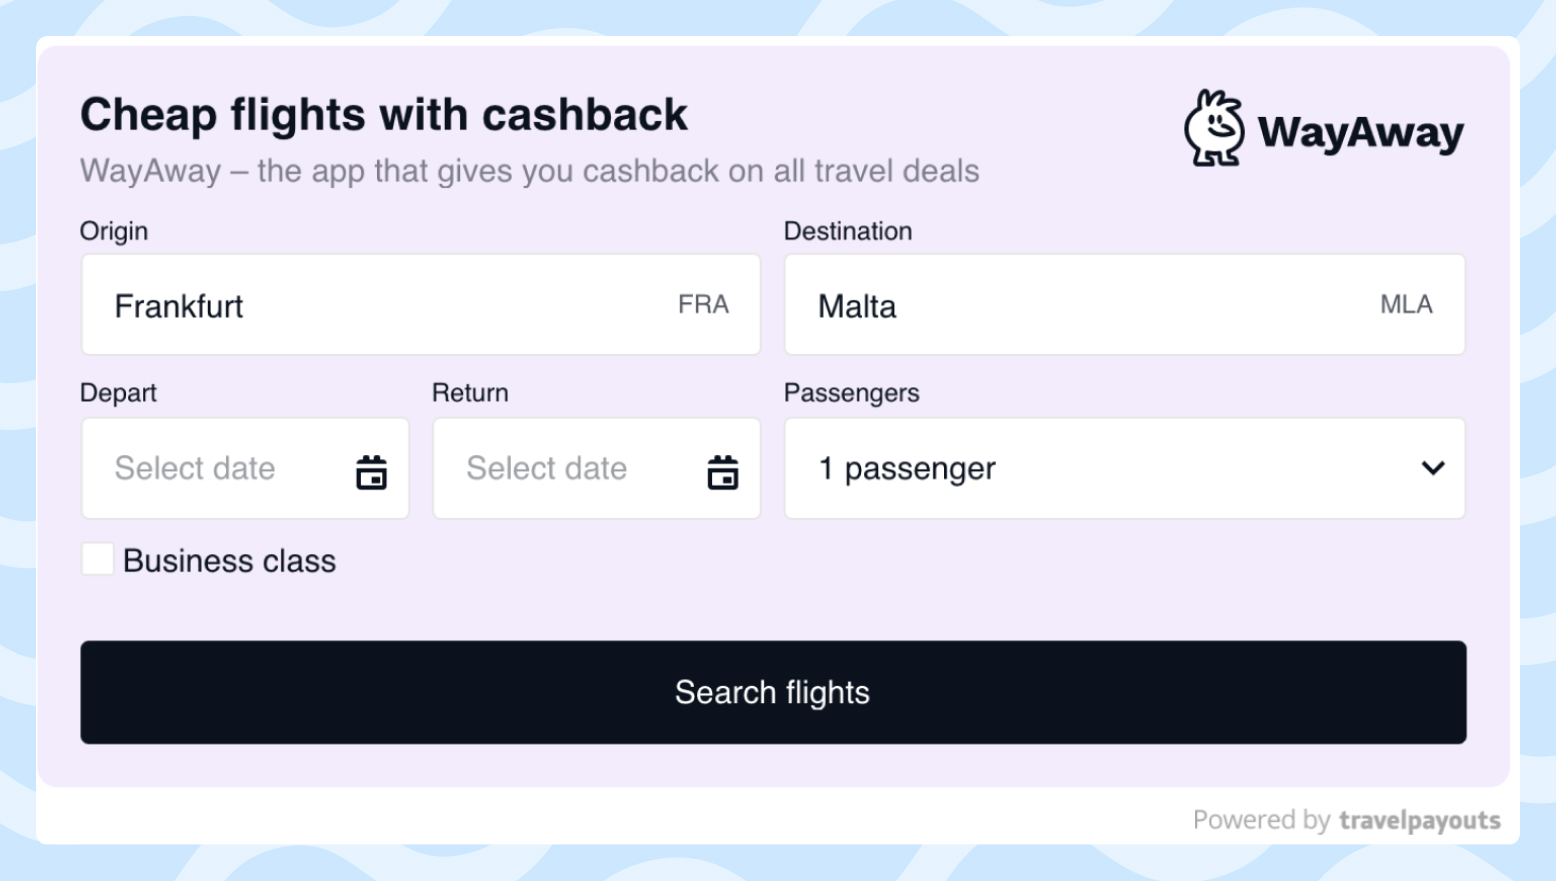 Example of the flight search form